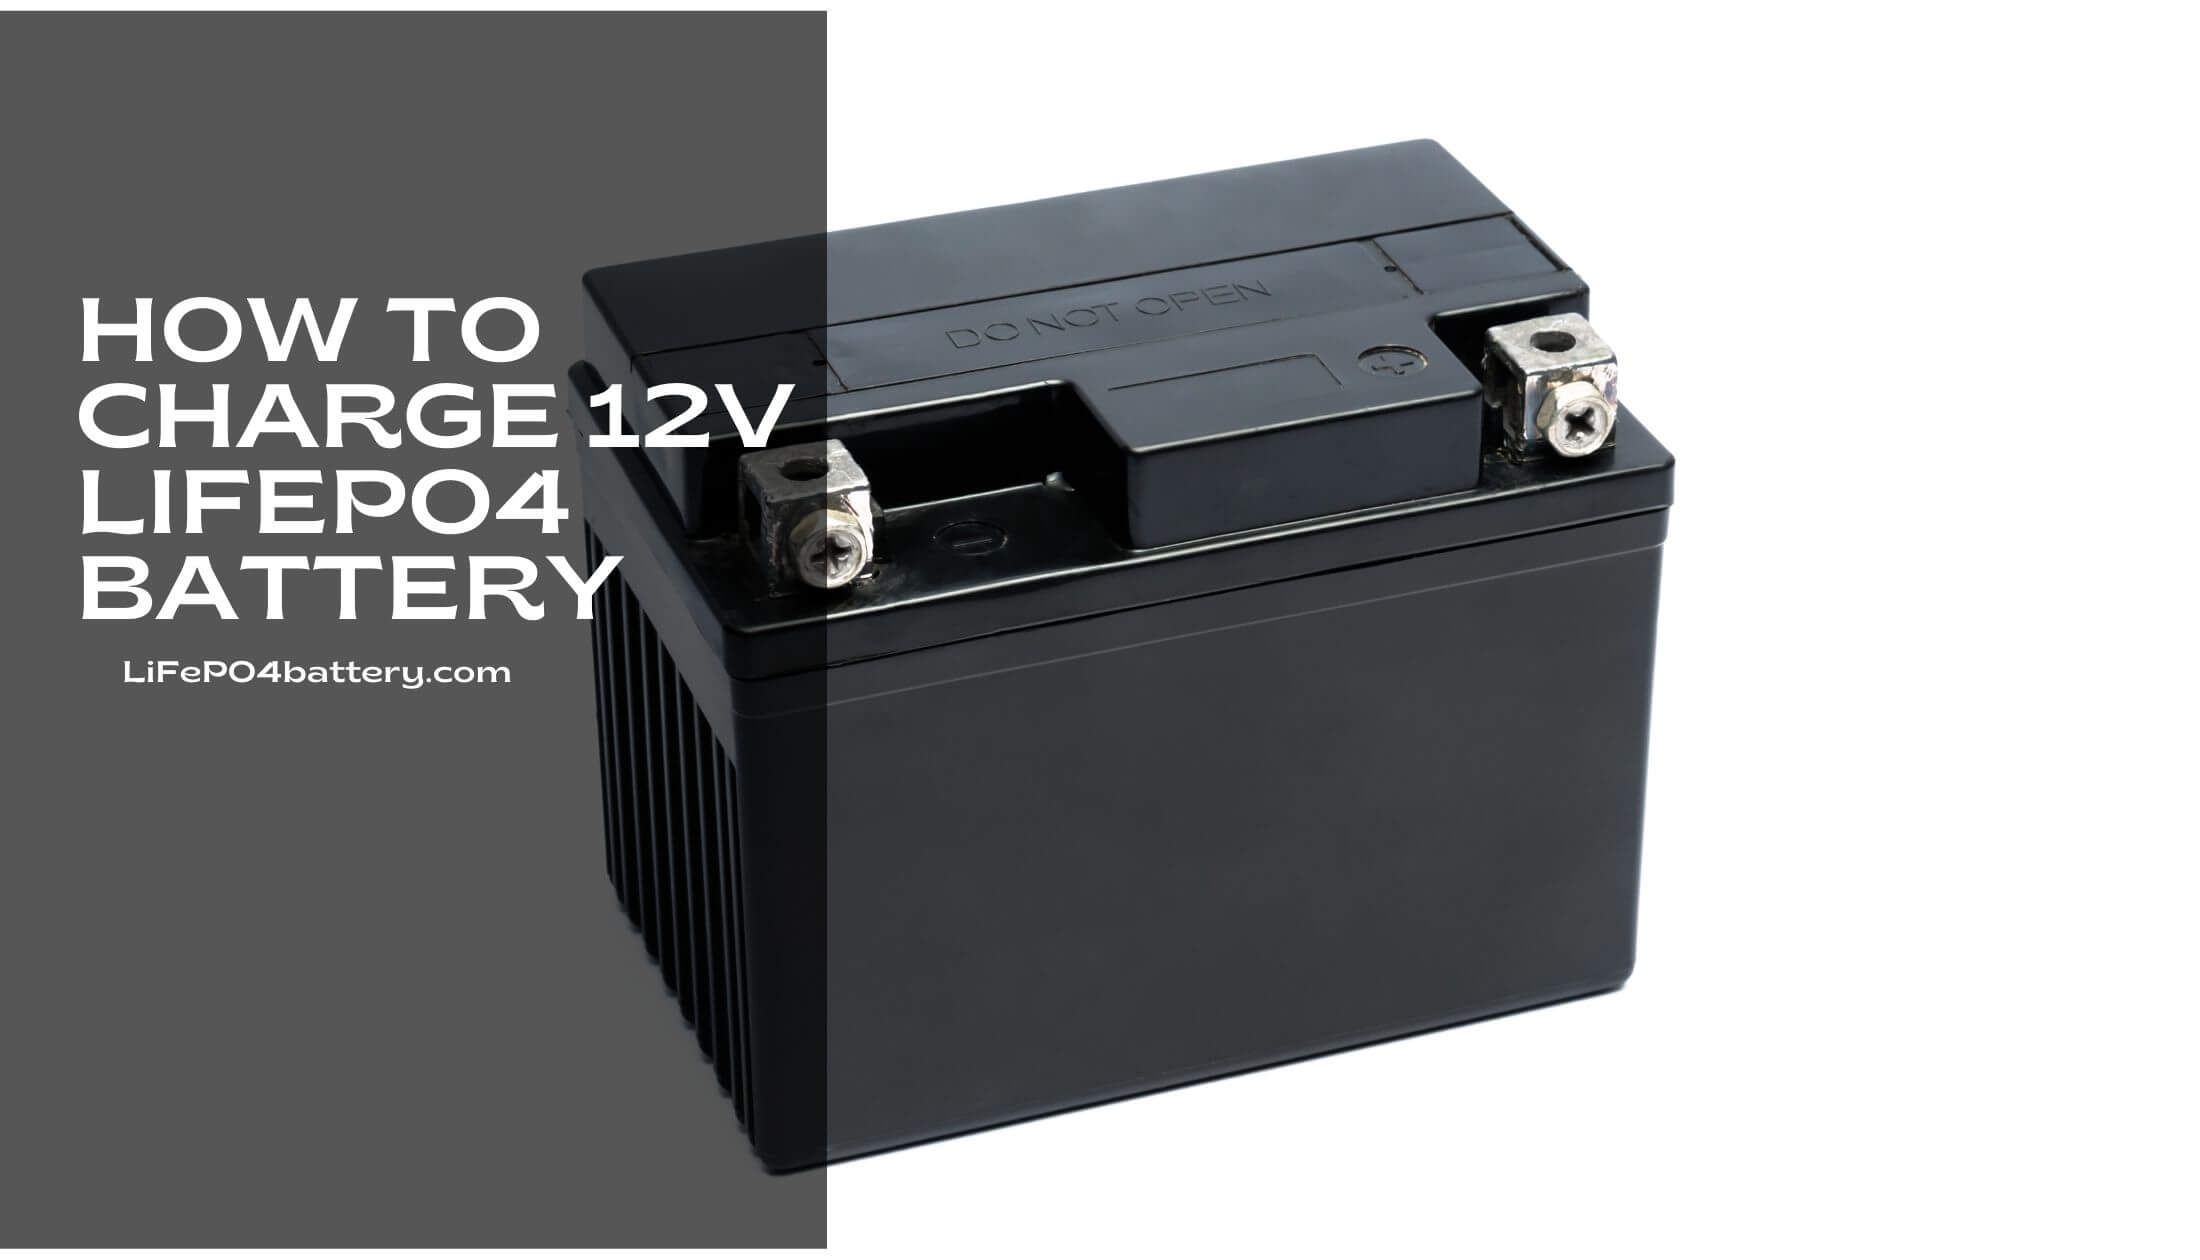 How To Charge 12v Lifepo4 Battery (2) (1)